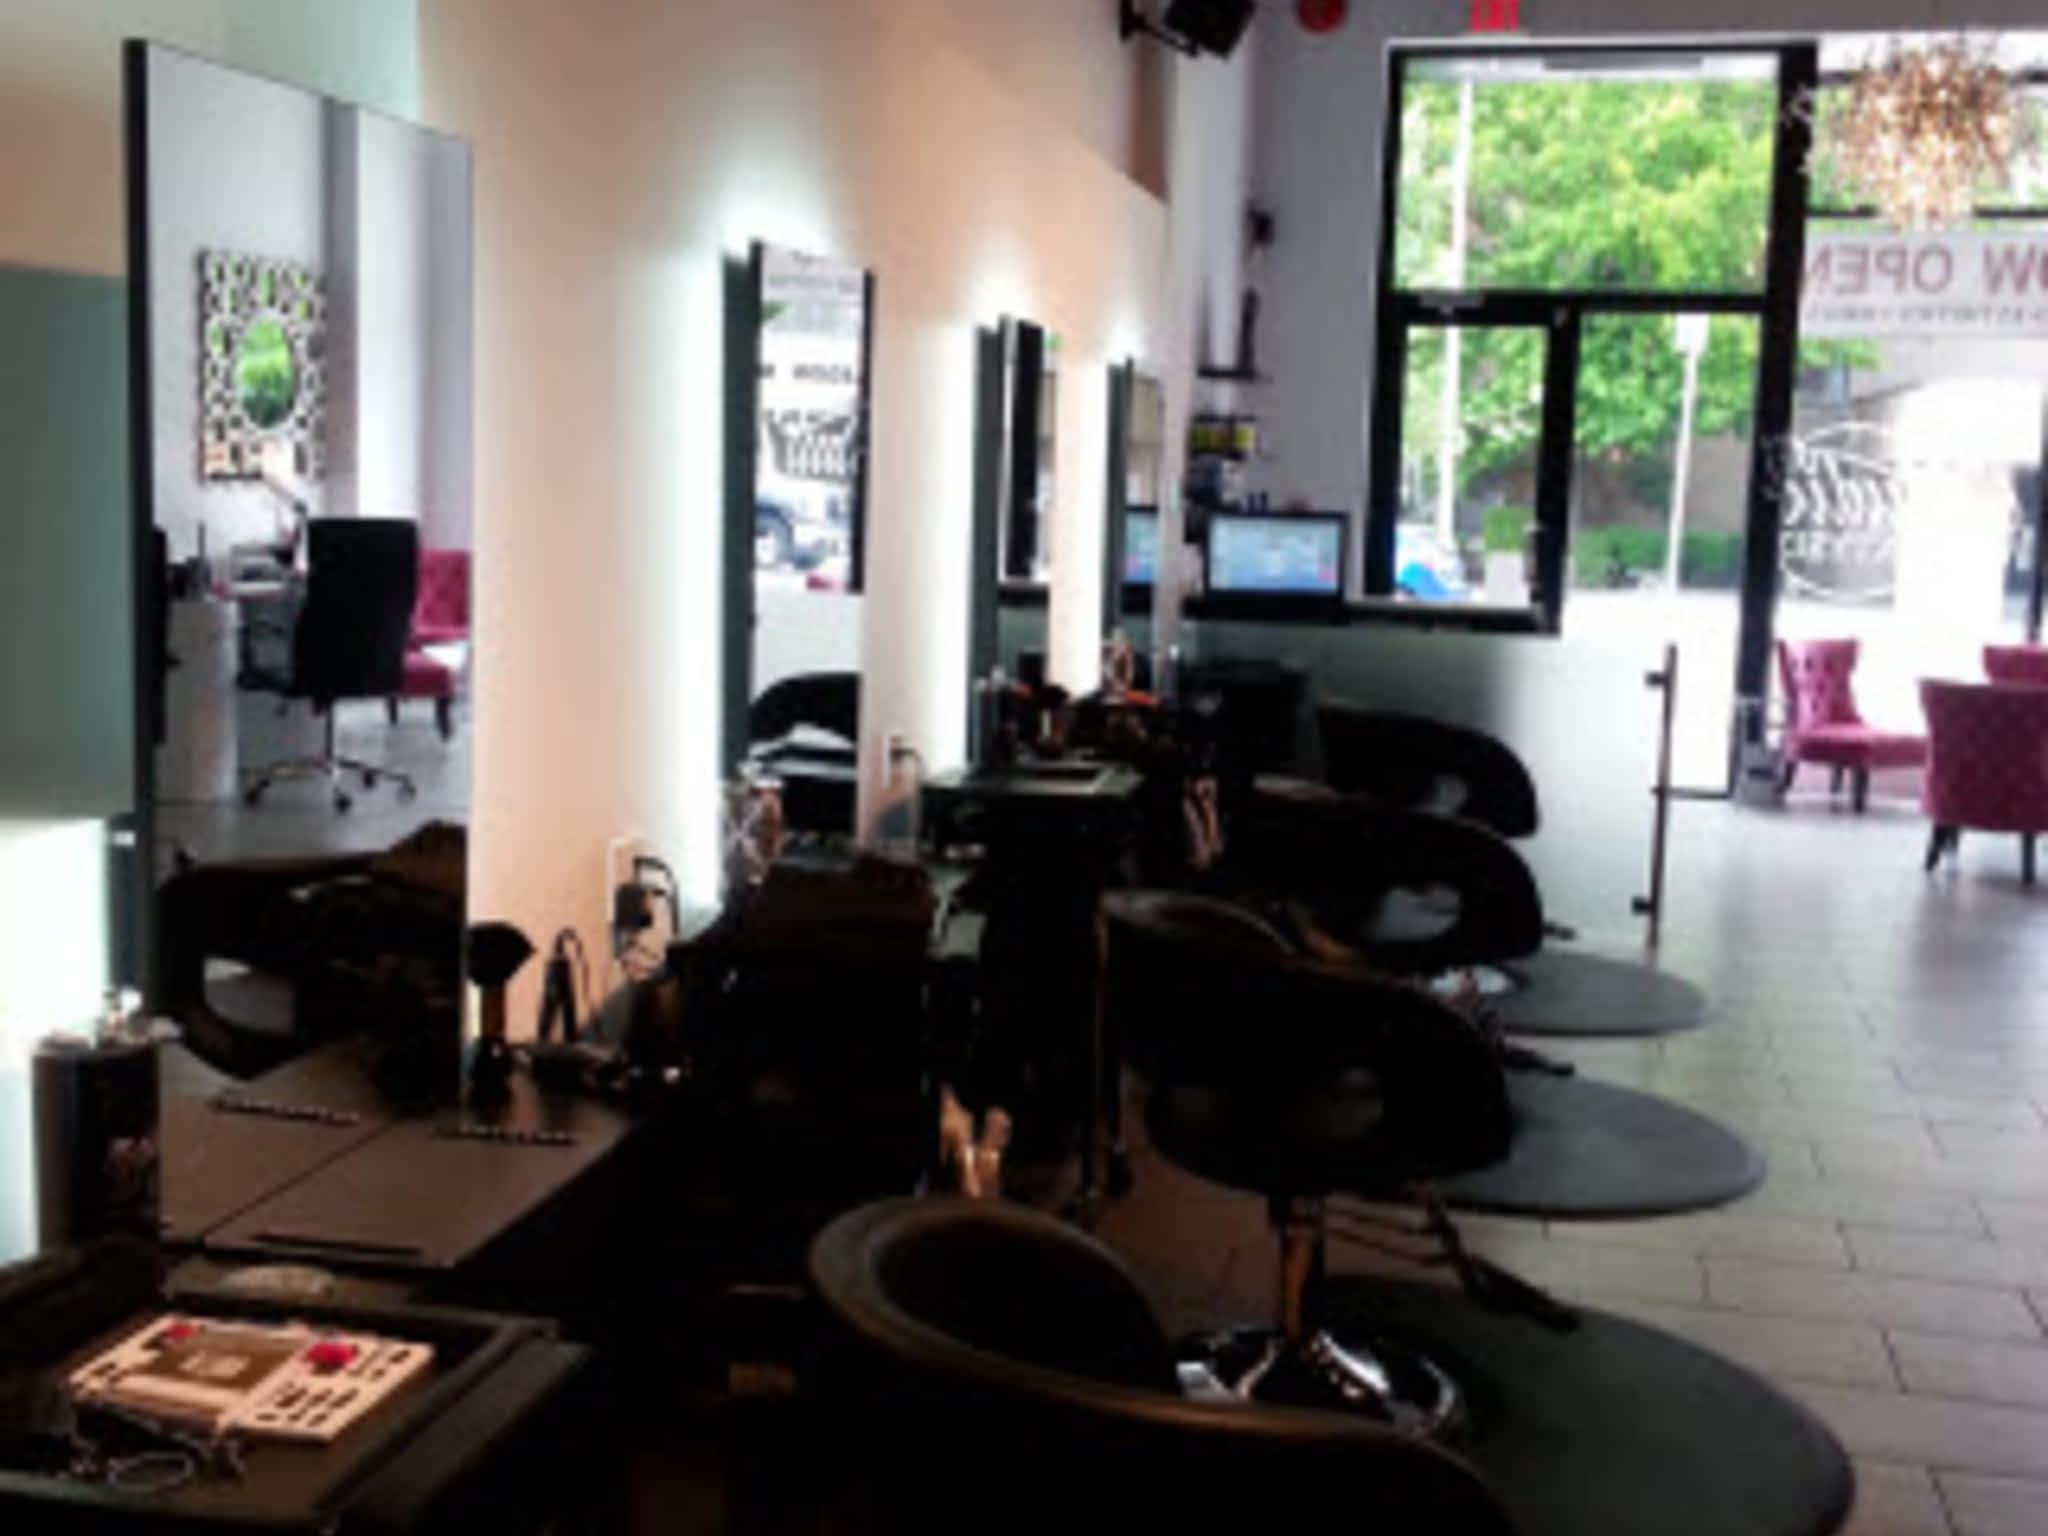 Studio 66 Salon New Westminster Bc 446 Sixth Street Canpages